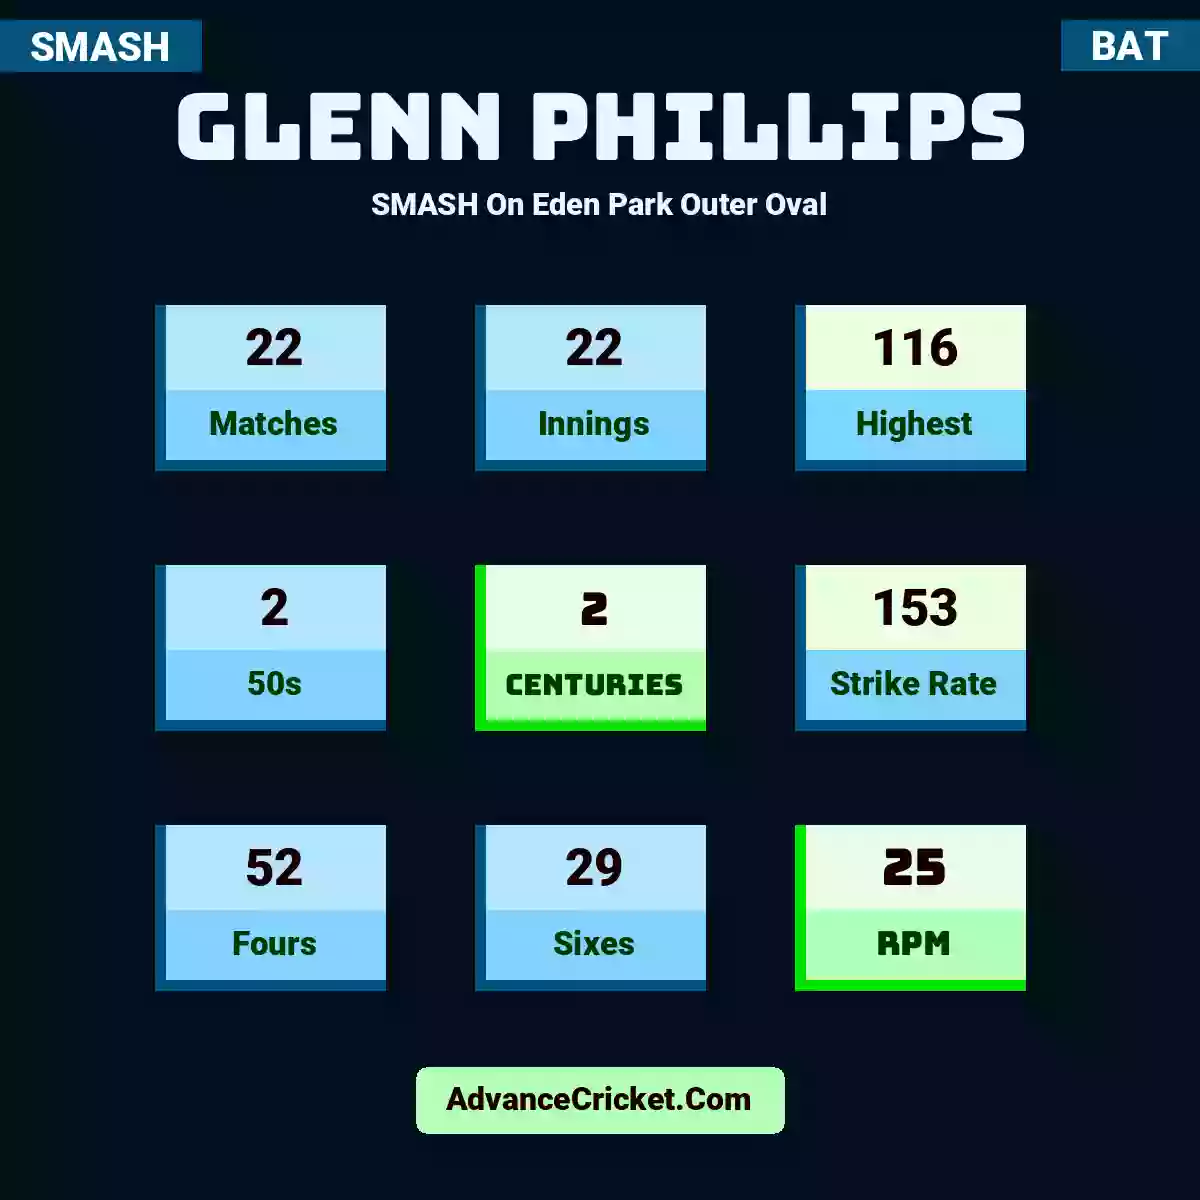 Glenn Phillips SMASH  On Eden Park Outer Oval, Glenn Phillips played 22 matches, scored 116 runs as highest, 2 half-centuries, and 2 centuries, with a strike rate of 153. G.Phillips hit 52 fours and 29 sixes, with an RPM of 25.